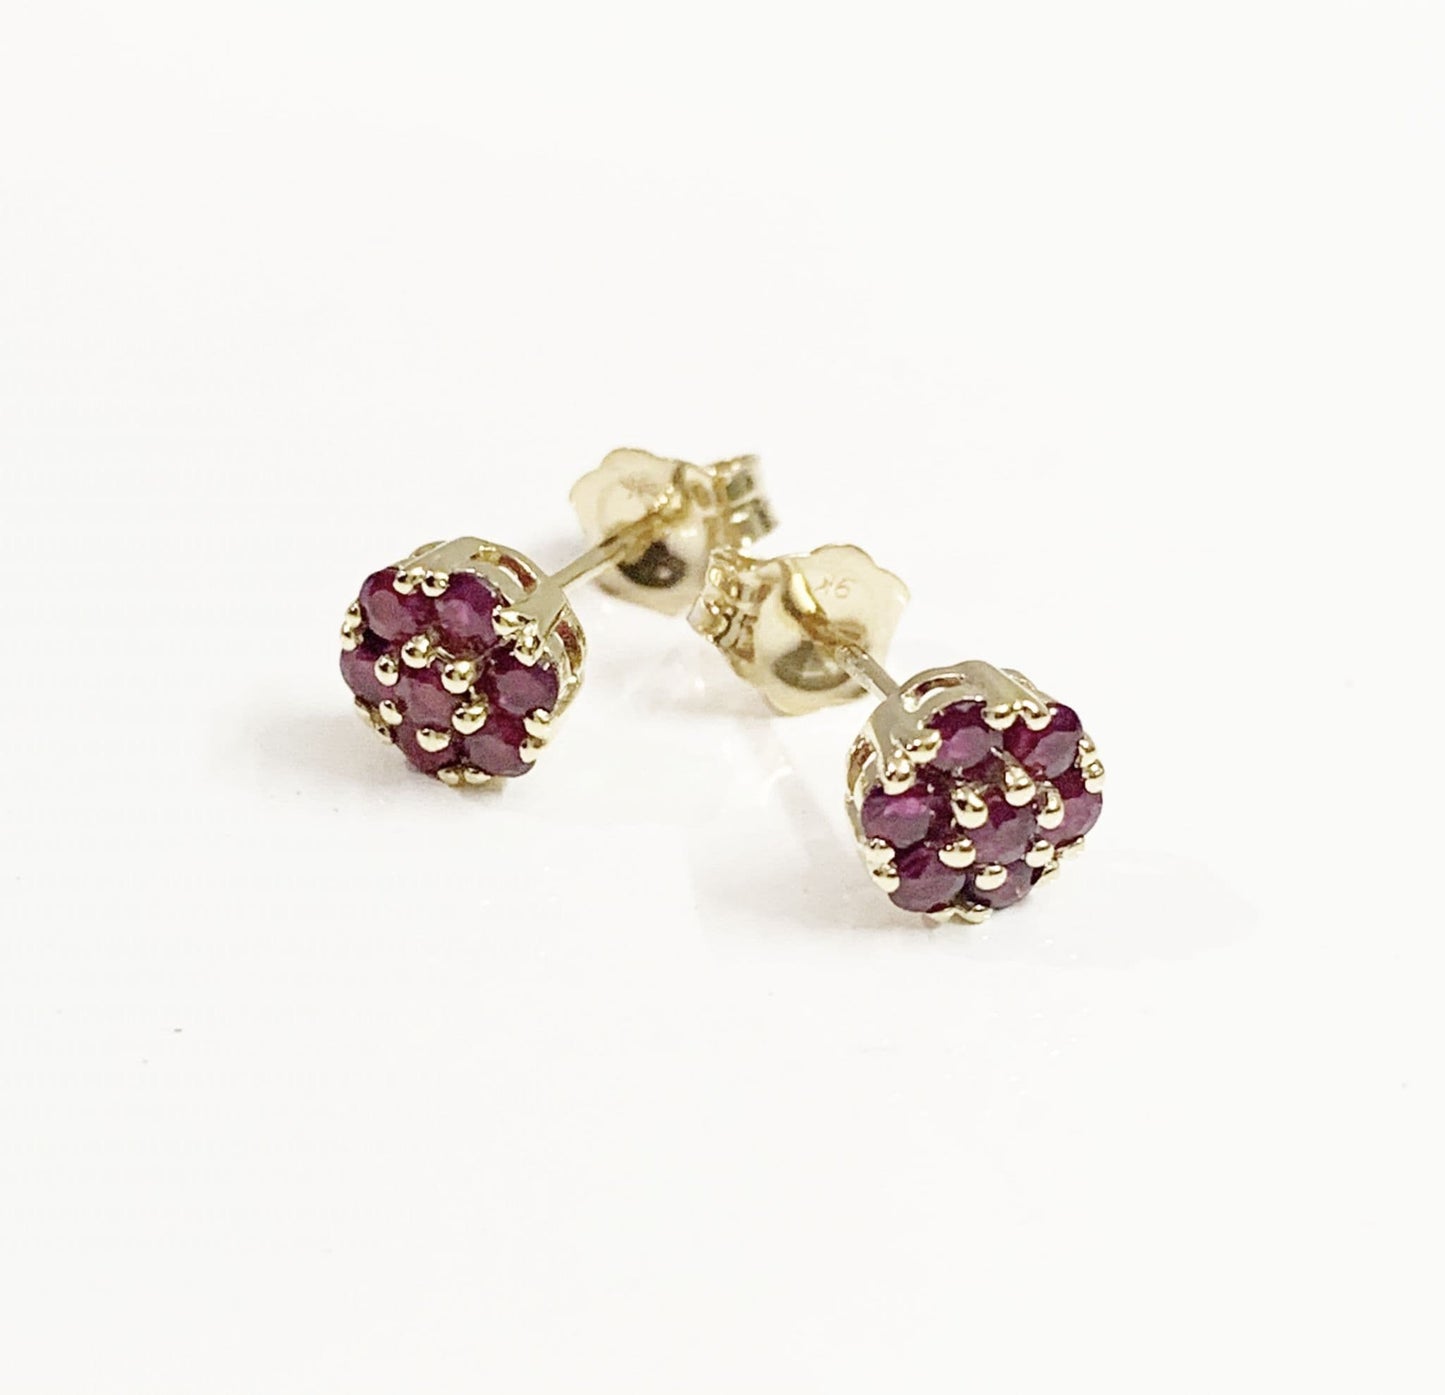 Real ruby earrings daisy cluster yellow gold stud